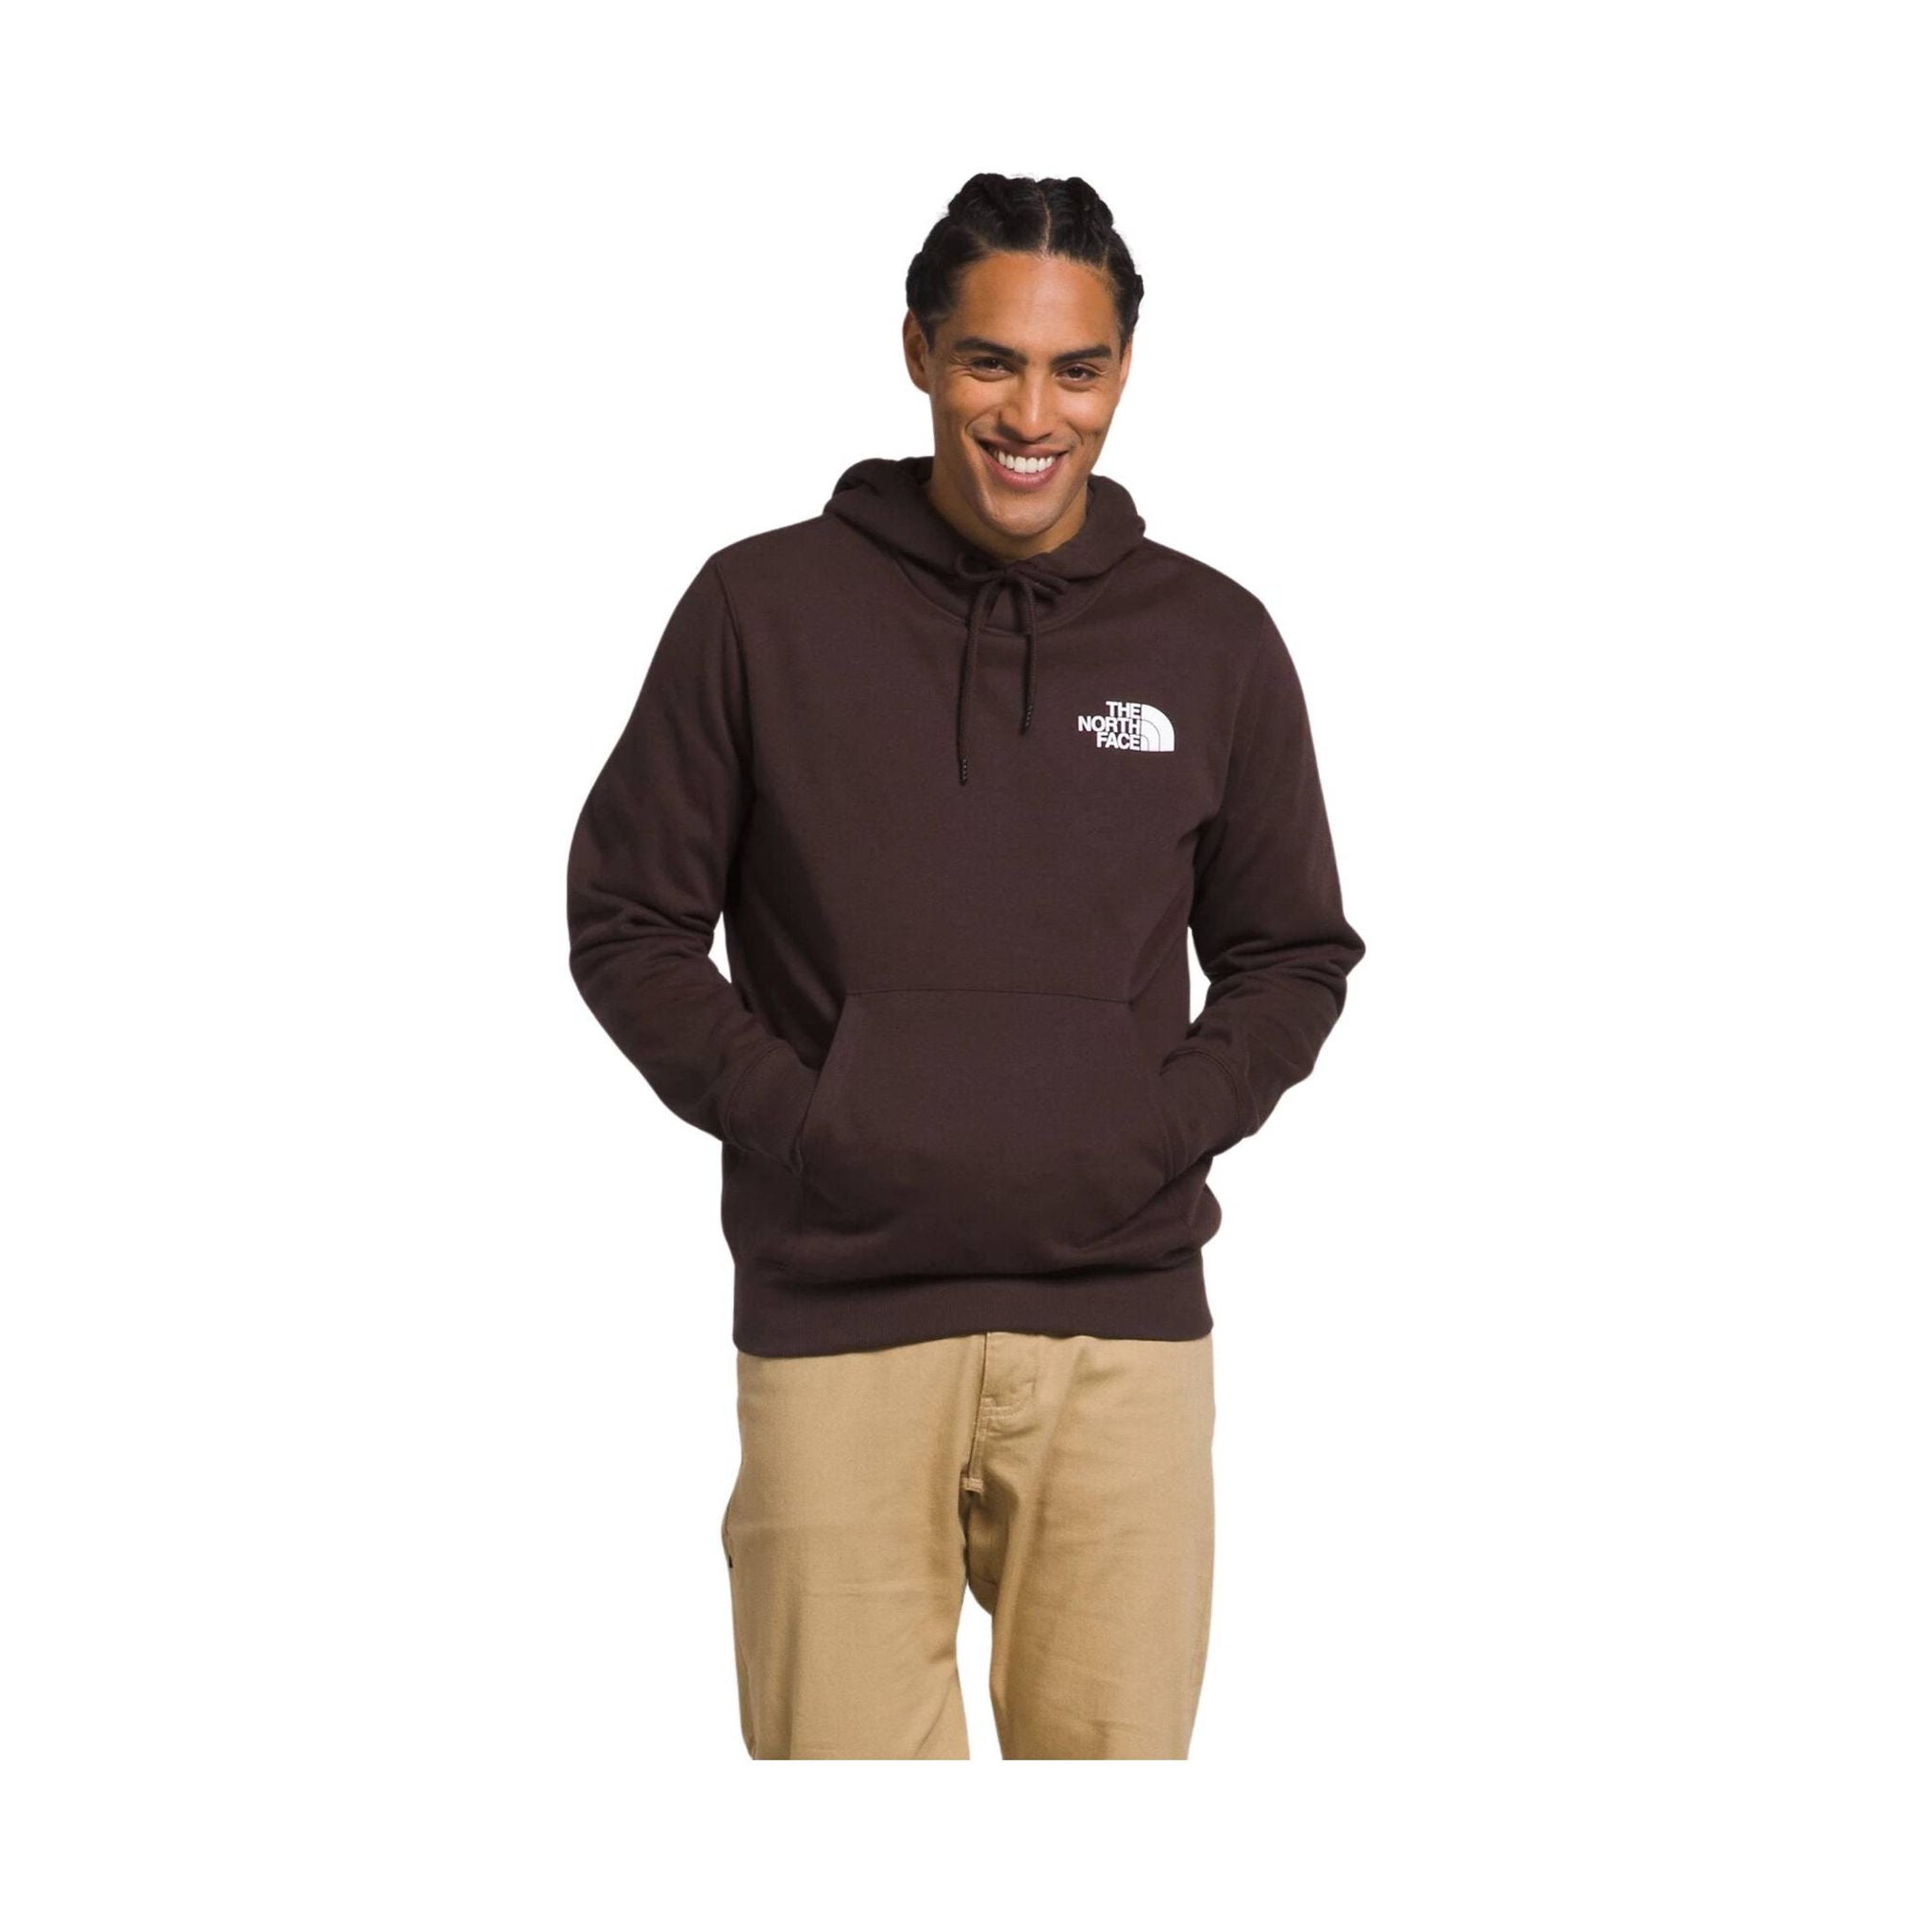 The North Face Men's Box NSE Pullover Hoodie - Coal Brown/Monogram